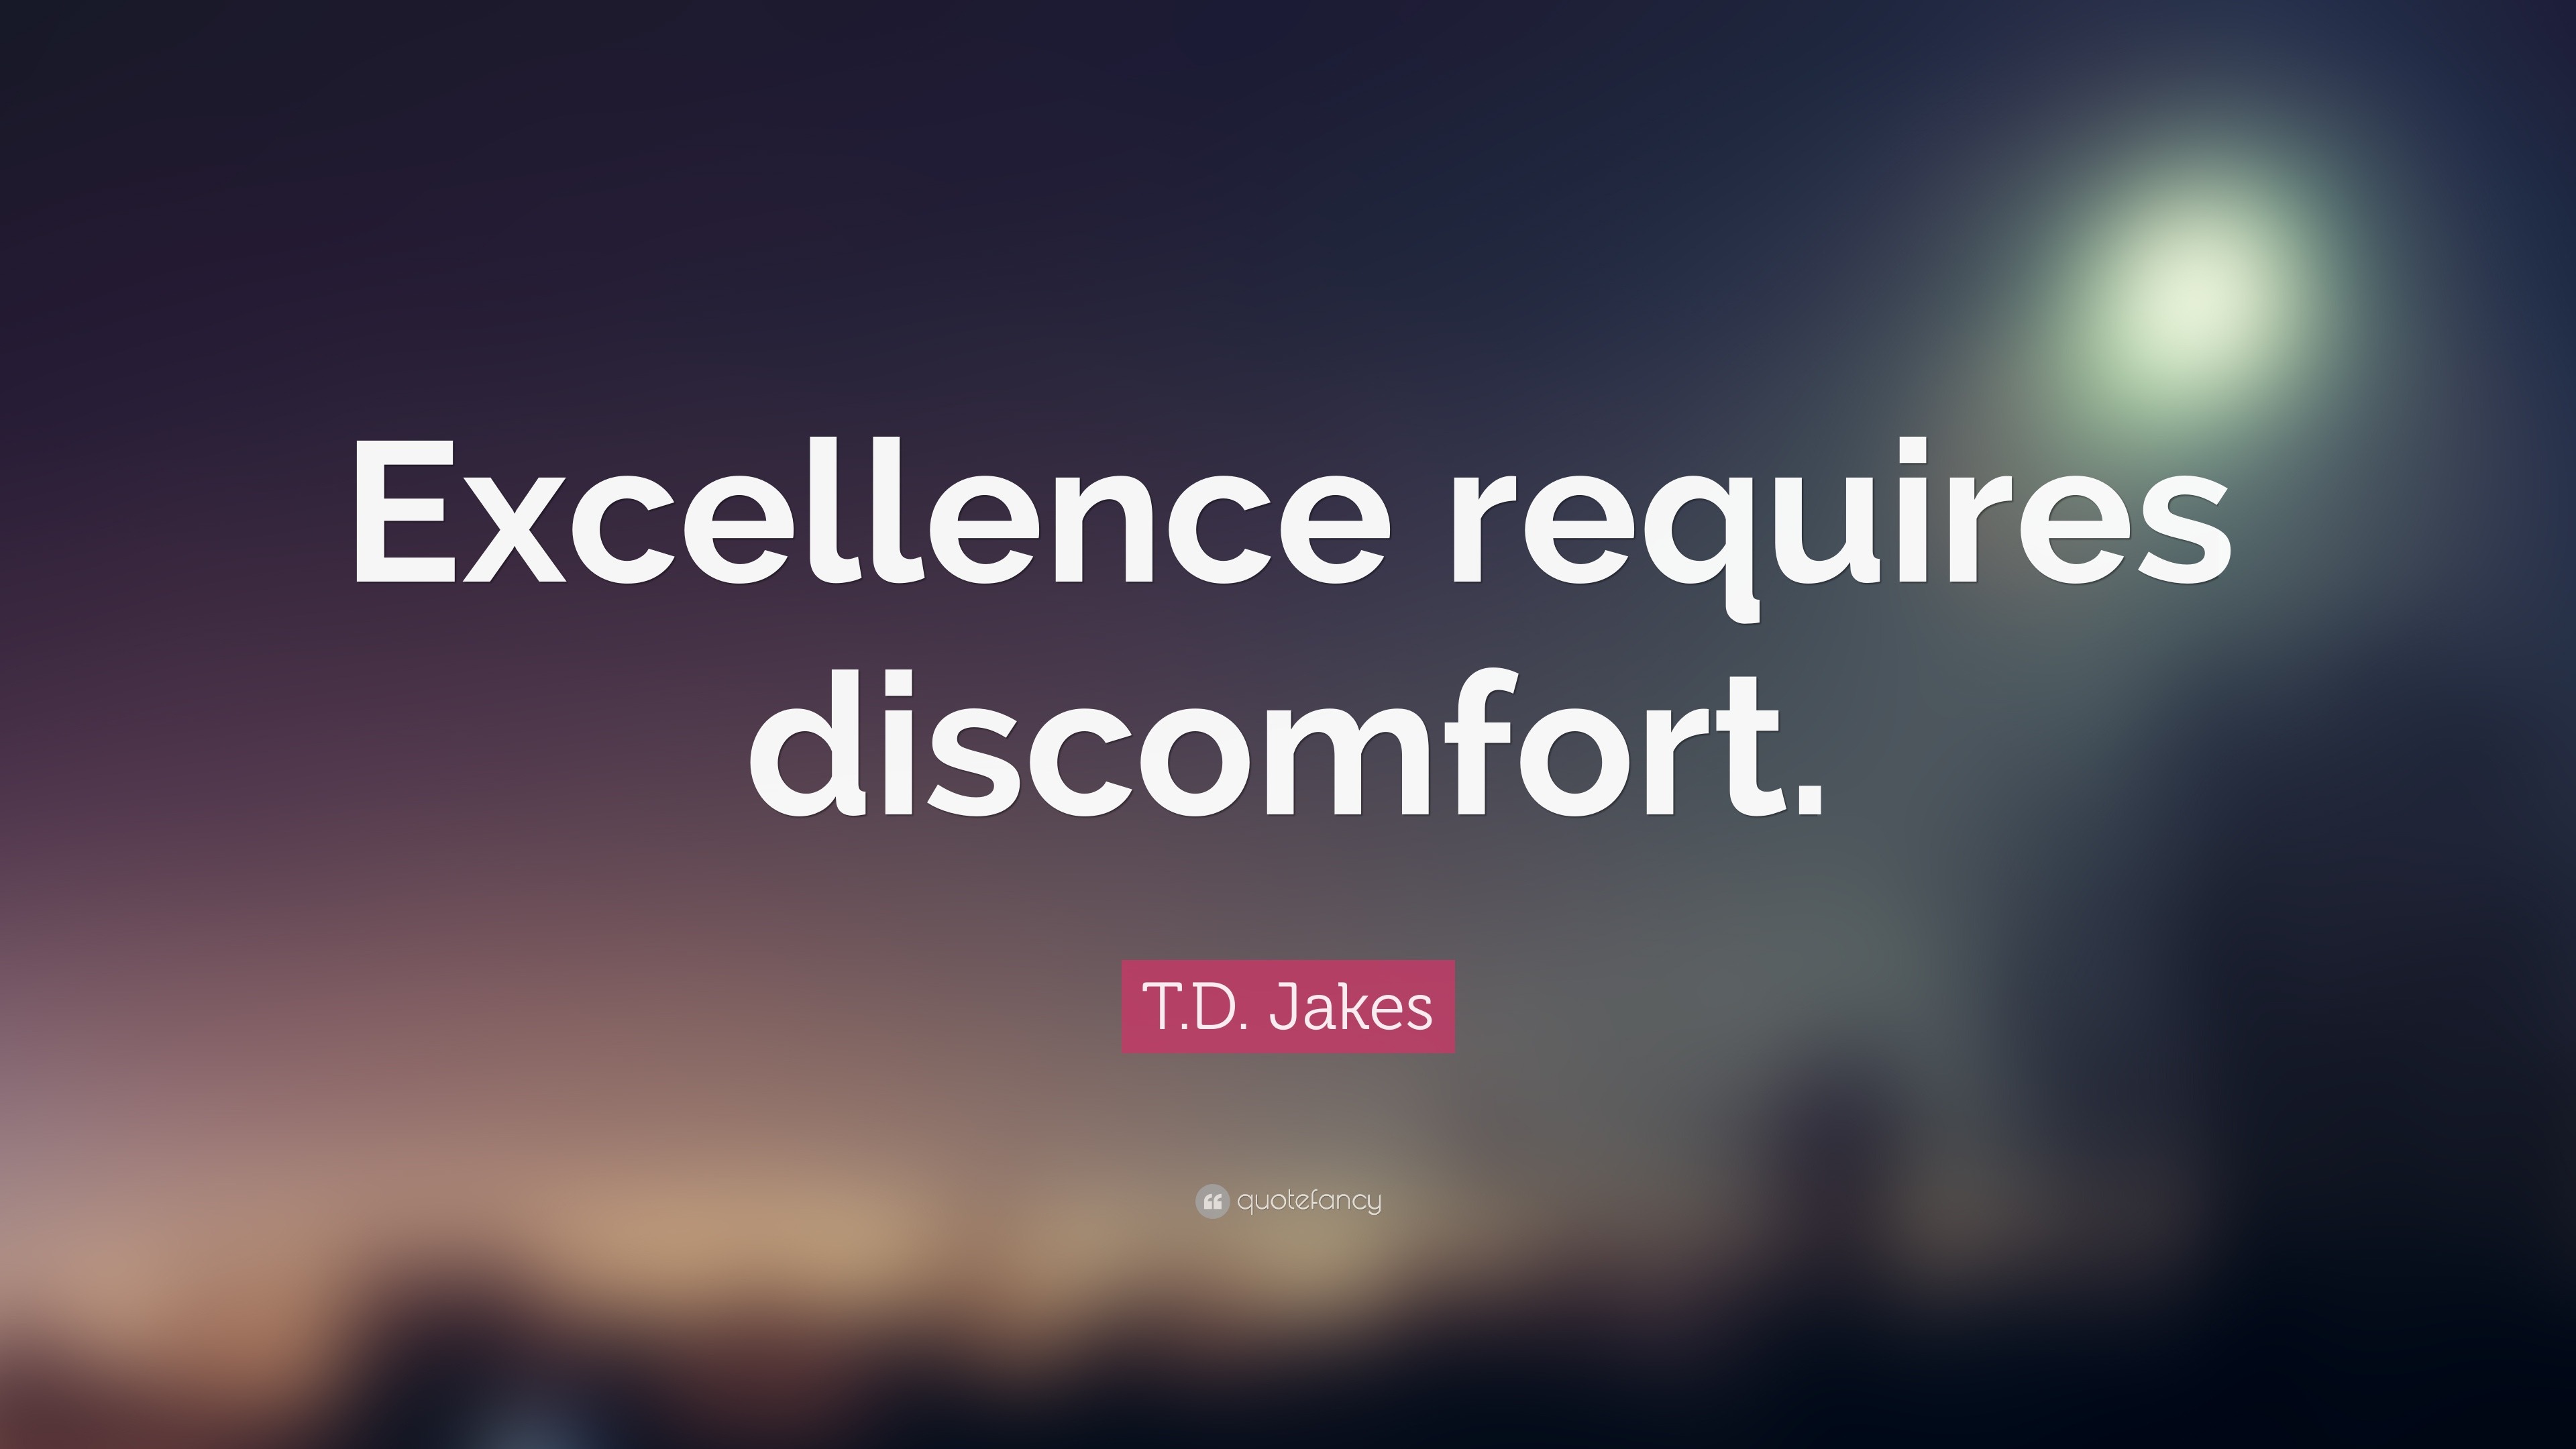 T.D. Jakes Quote: “Excellence requires discomfort.” (20 wallpapers